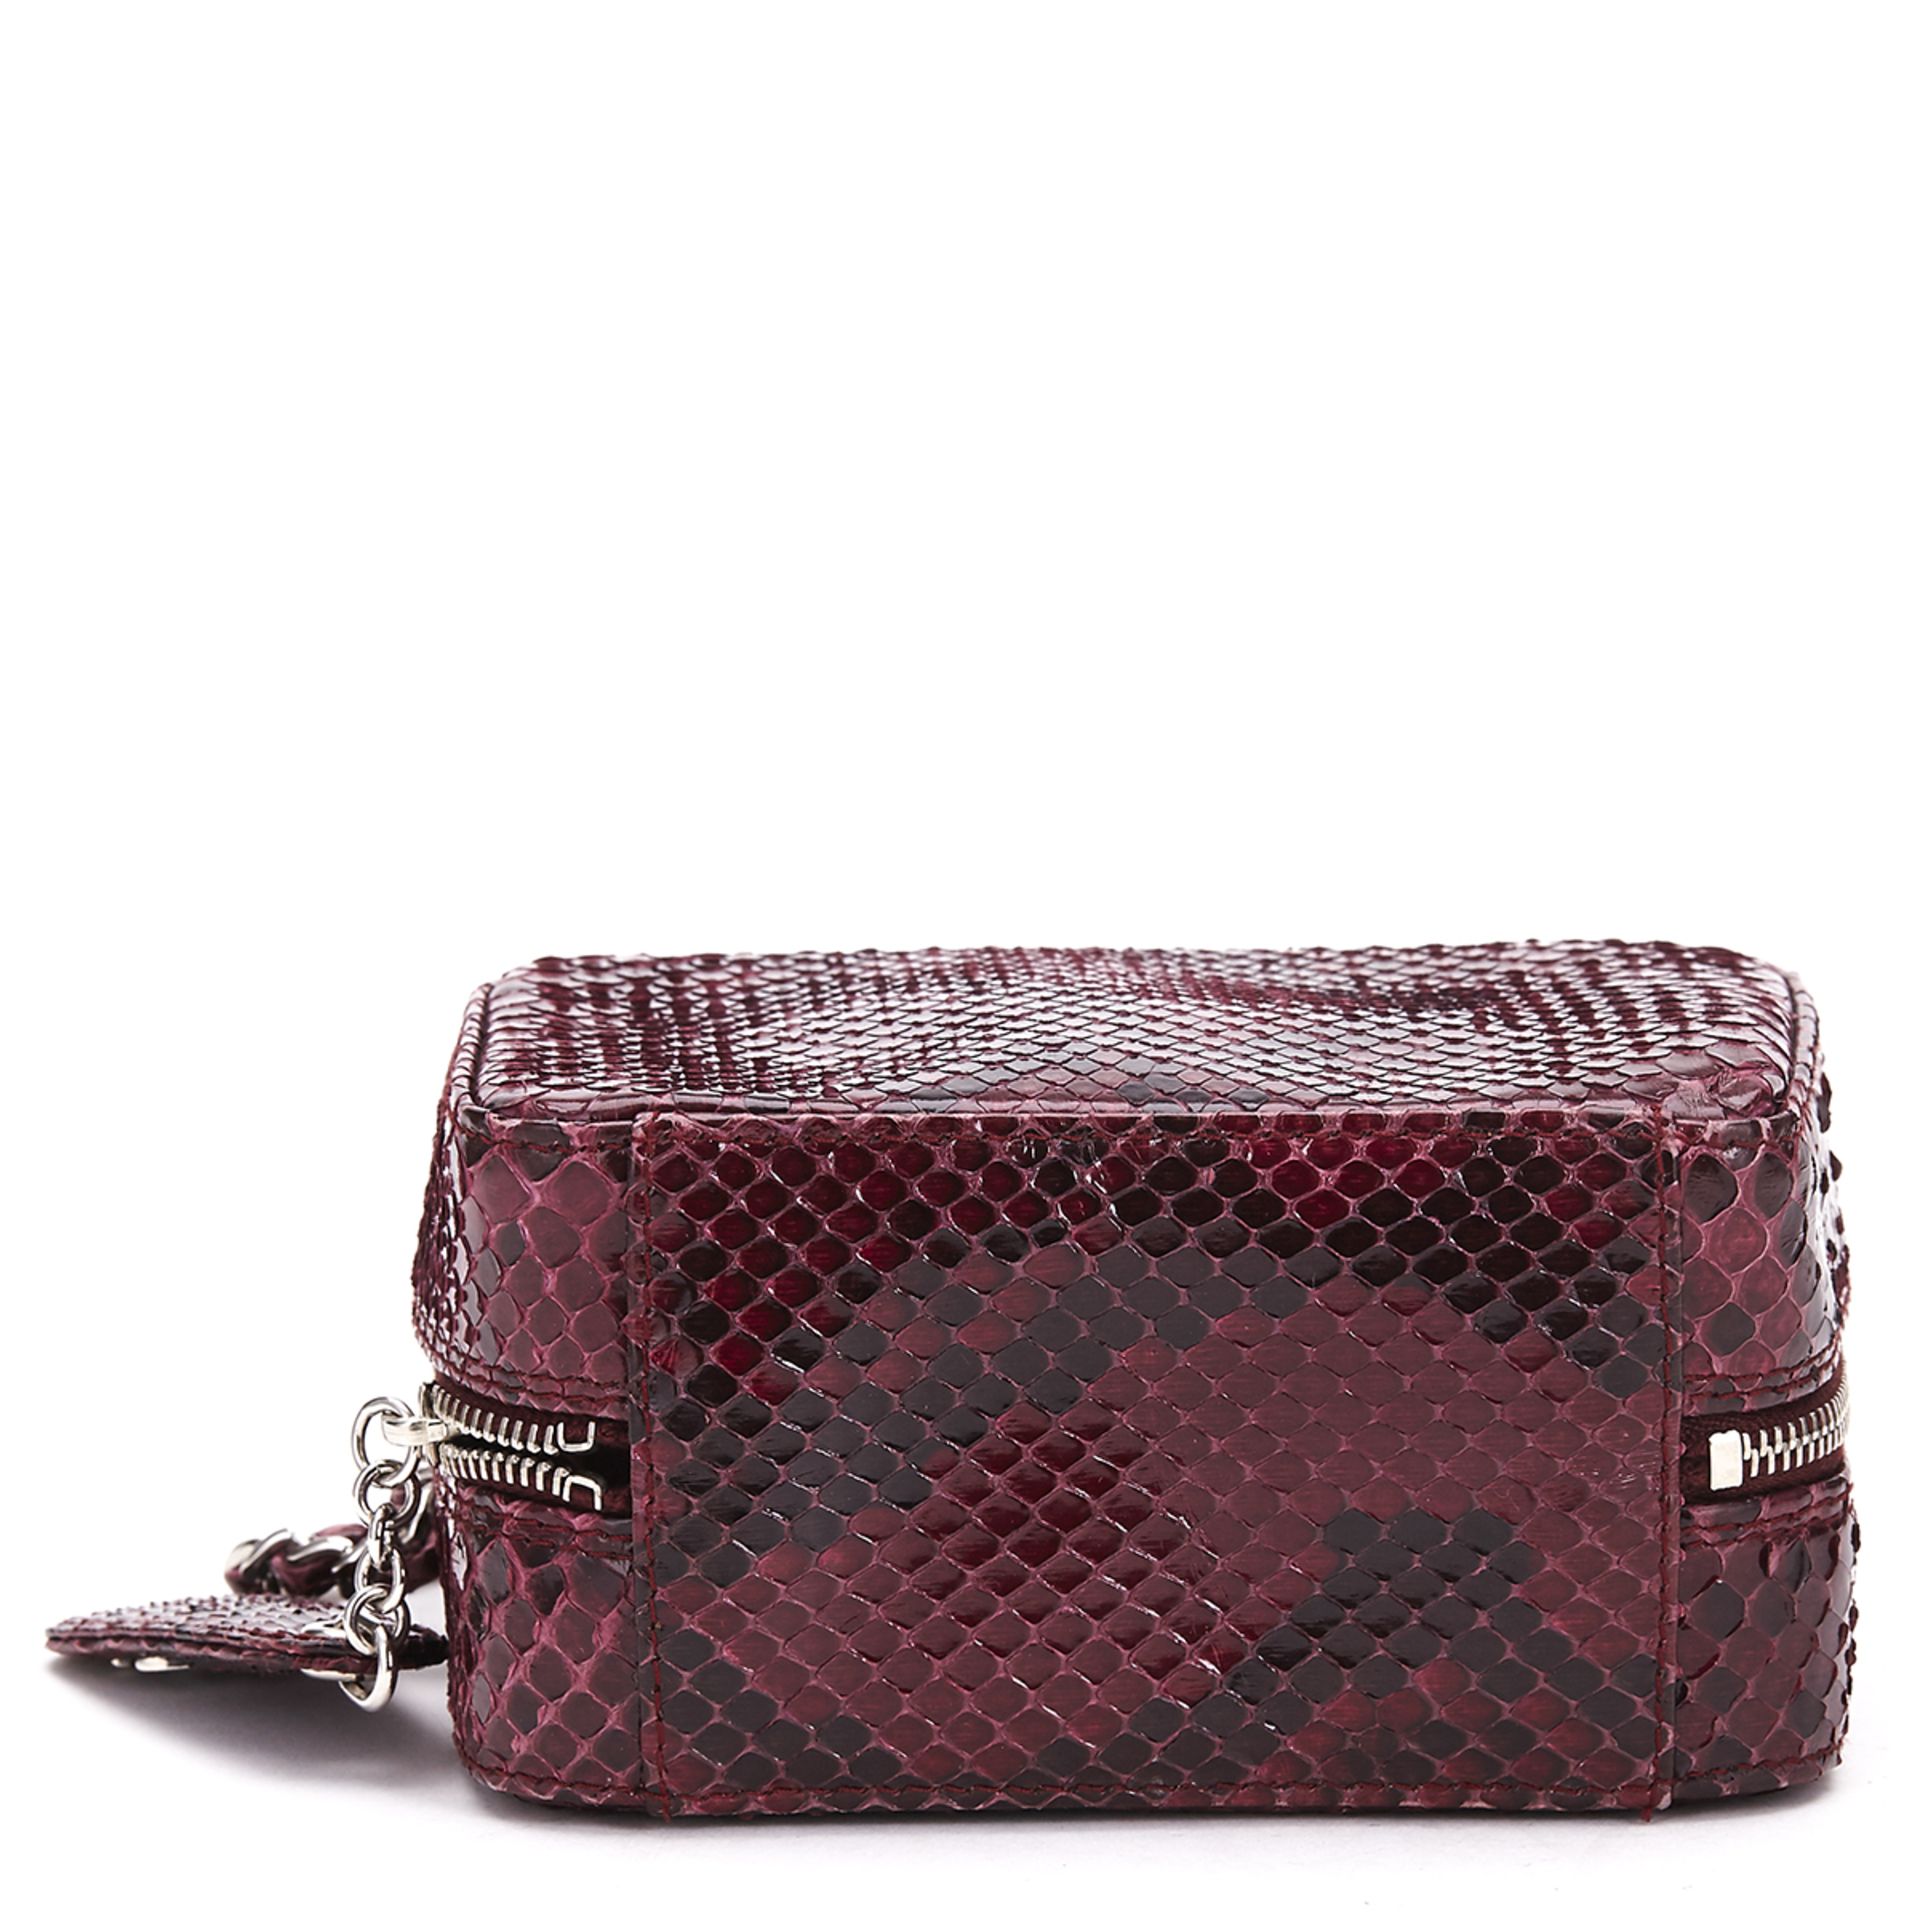 CHANEL Mini Timeless Bag , - Raspberry Python Leather Mini TYPE Clutch   SERIAL NUMBER 6258730 - Image 5 of 9